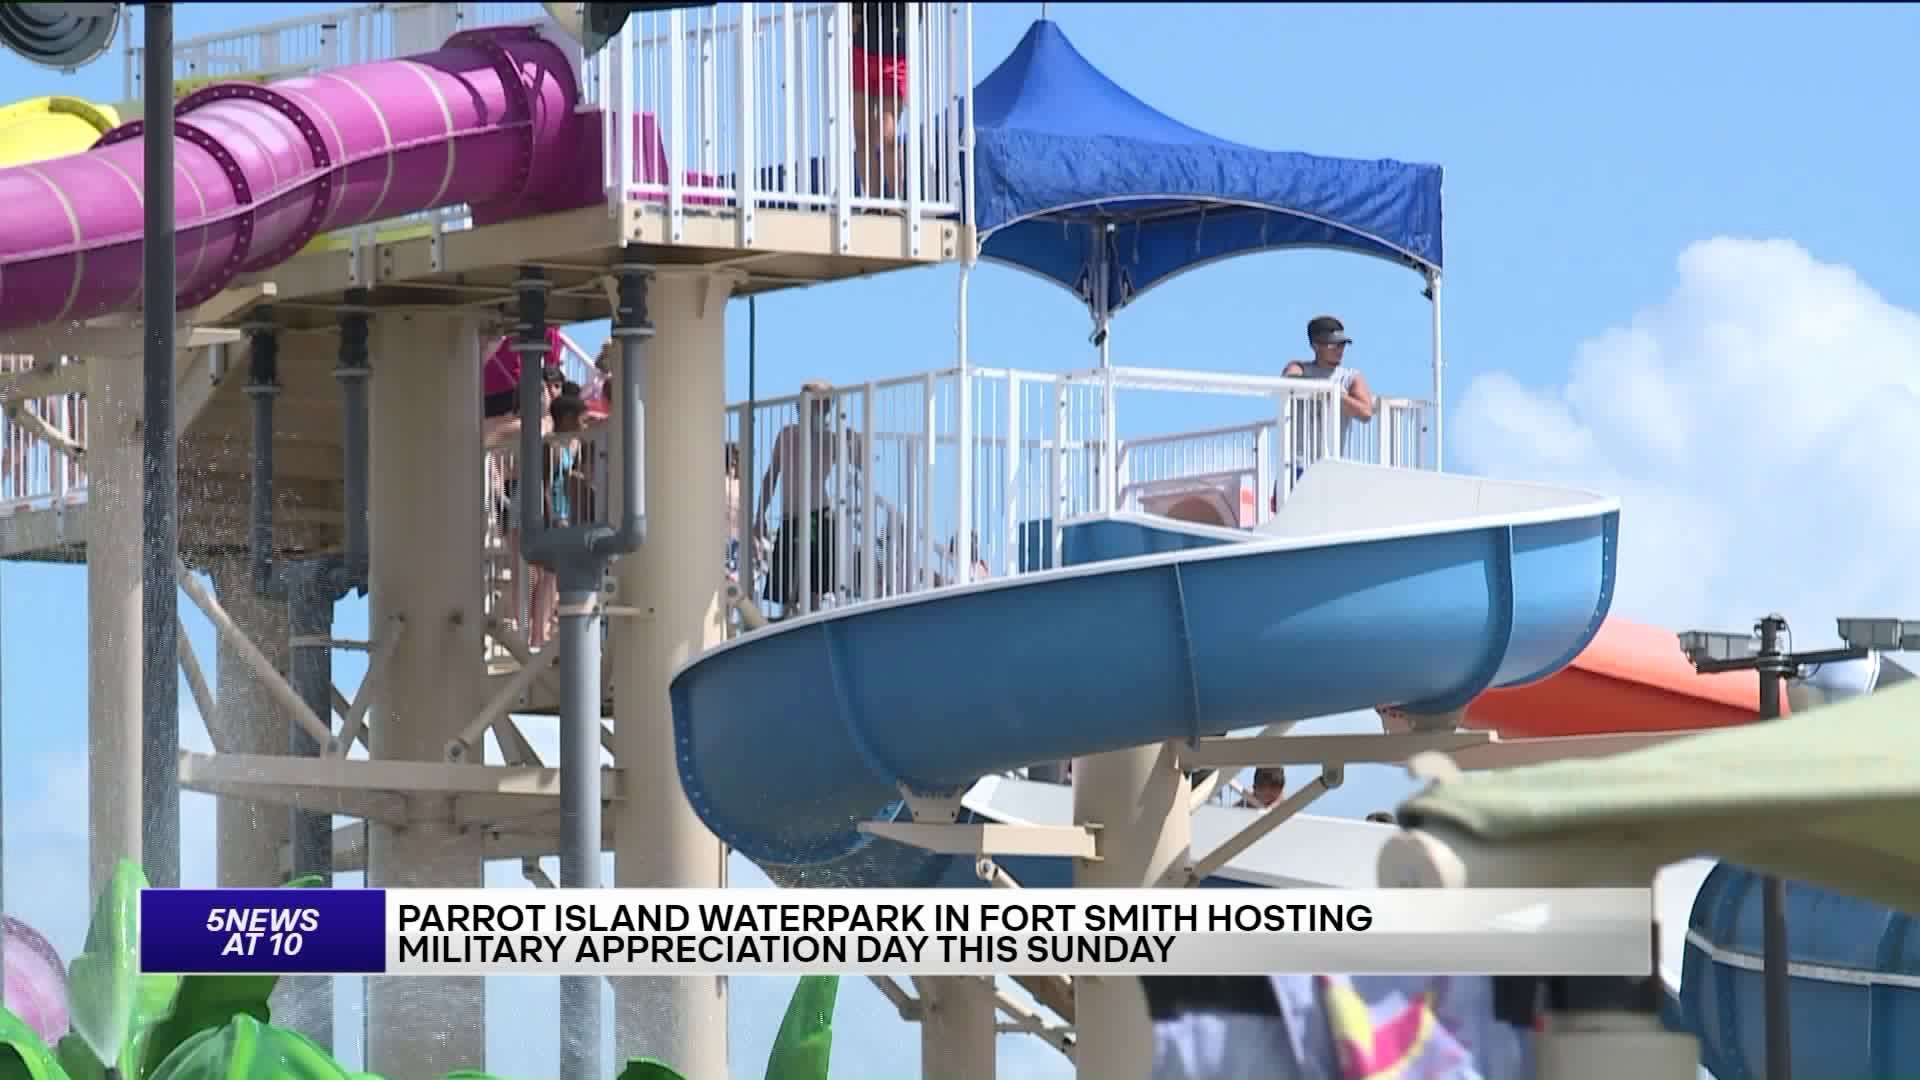 Parrot Island Water Park Hosting Military Appreciation Event